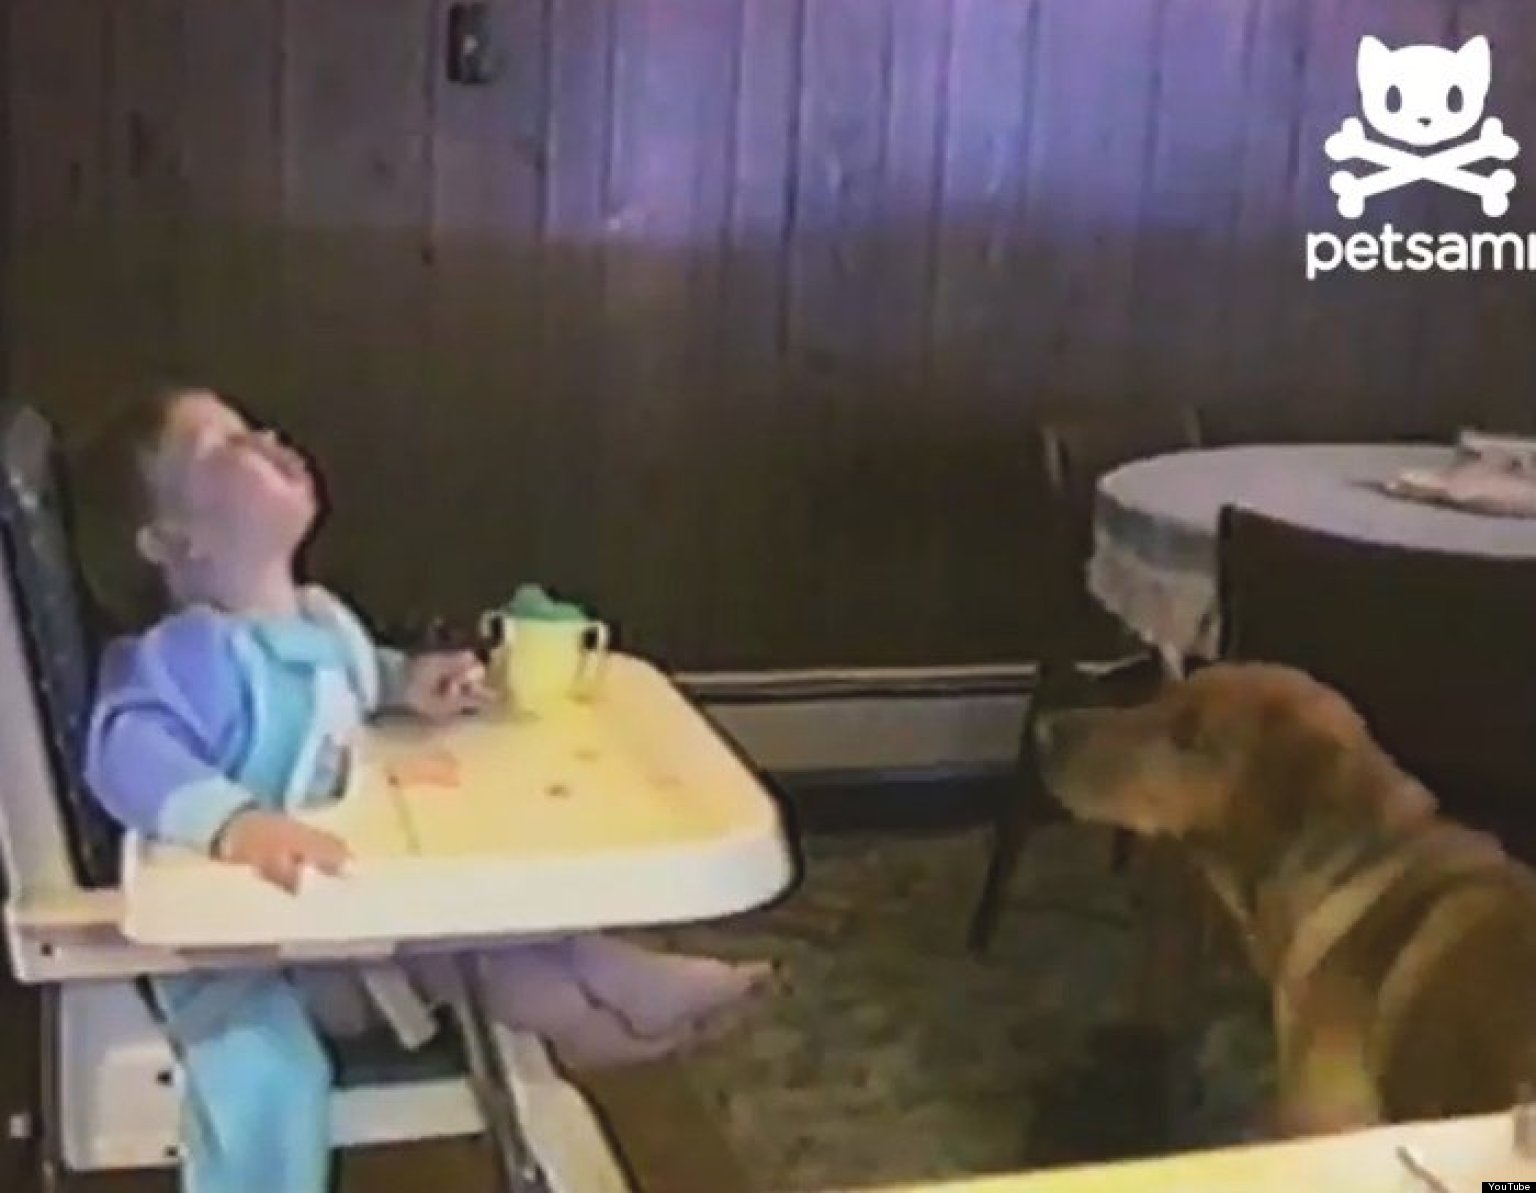 Baby Spits Food Into Dog's Mouth (VIDEO) | HuffPost UK